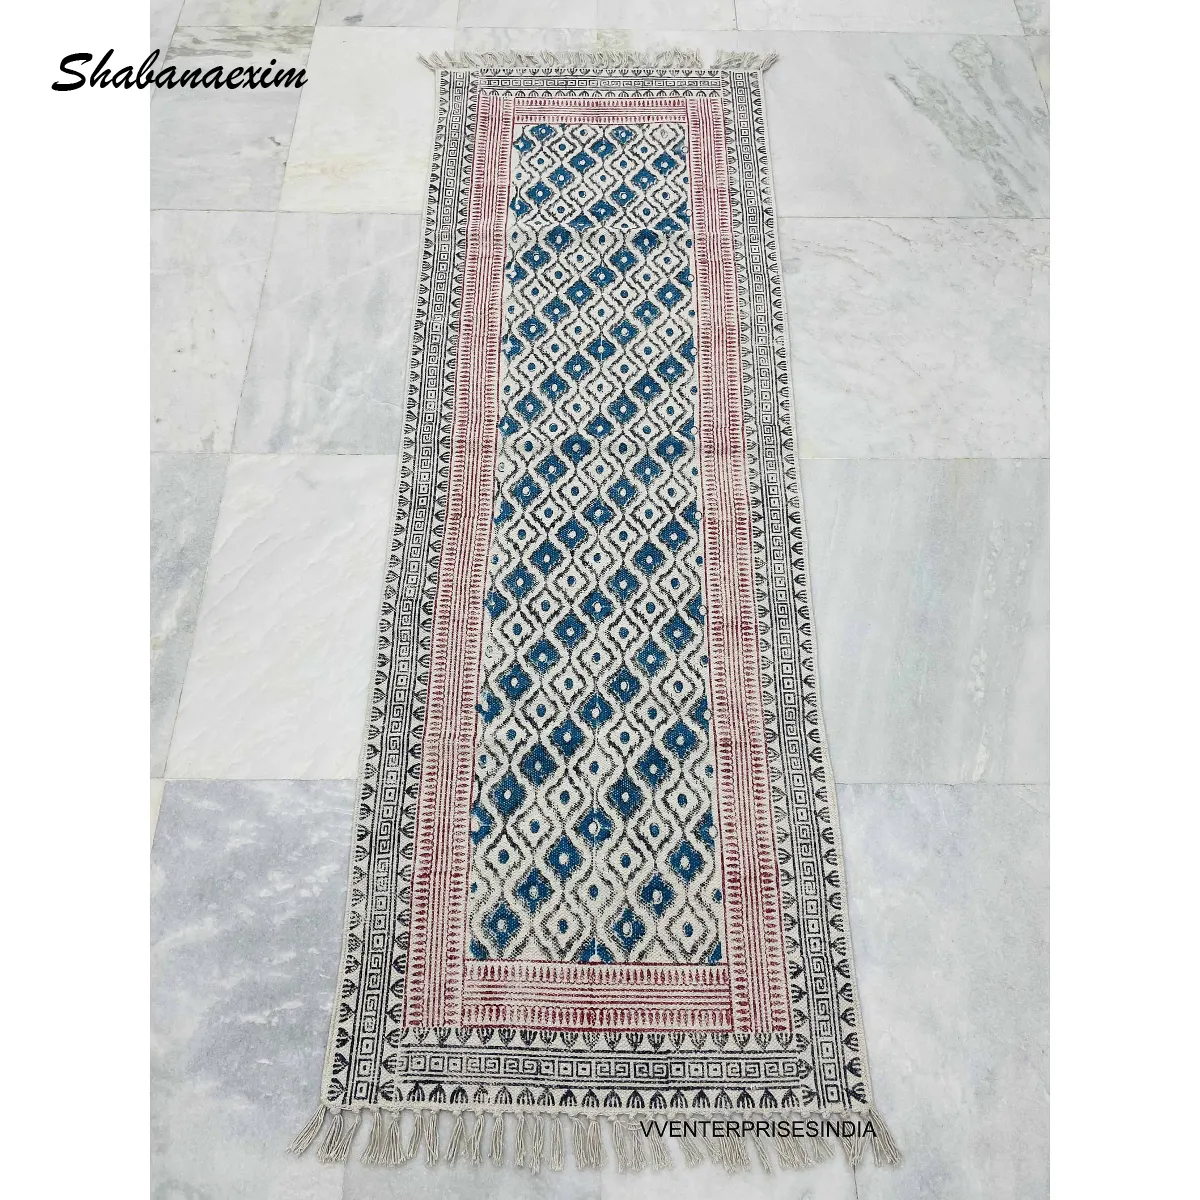 Rug Tufted Cotton Eco-Friendly Designer Handmade Printed Cotton Carpets with Fringe Runner Rugs